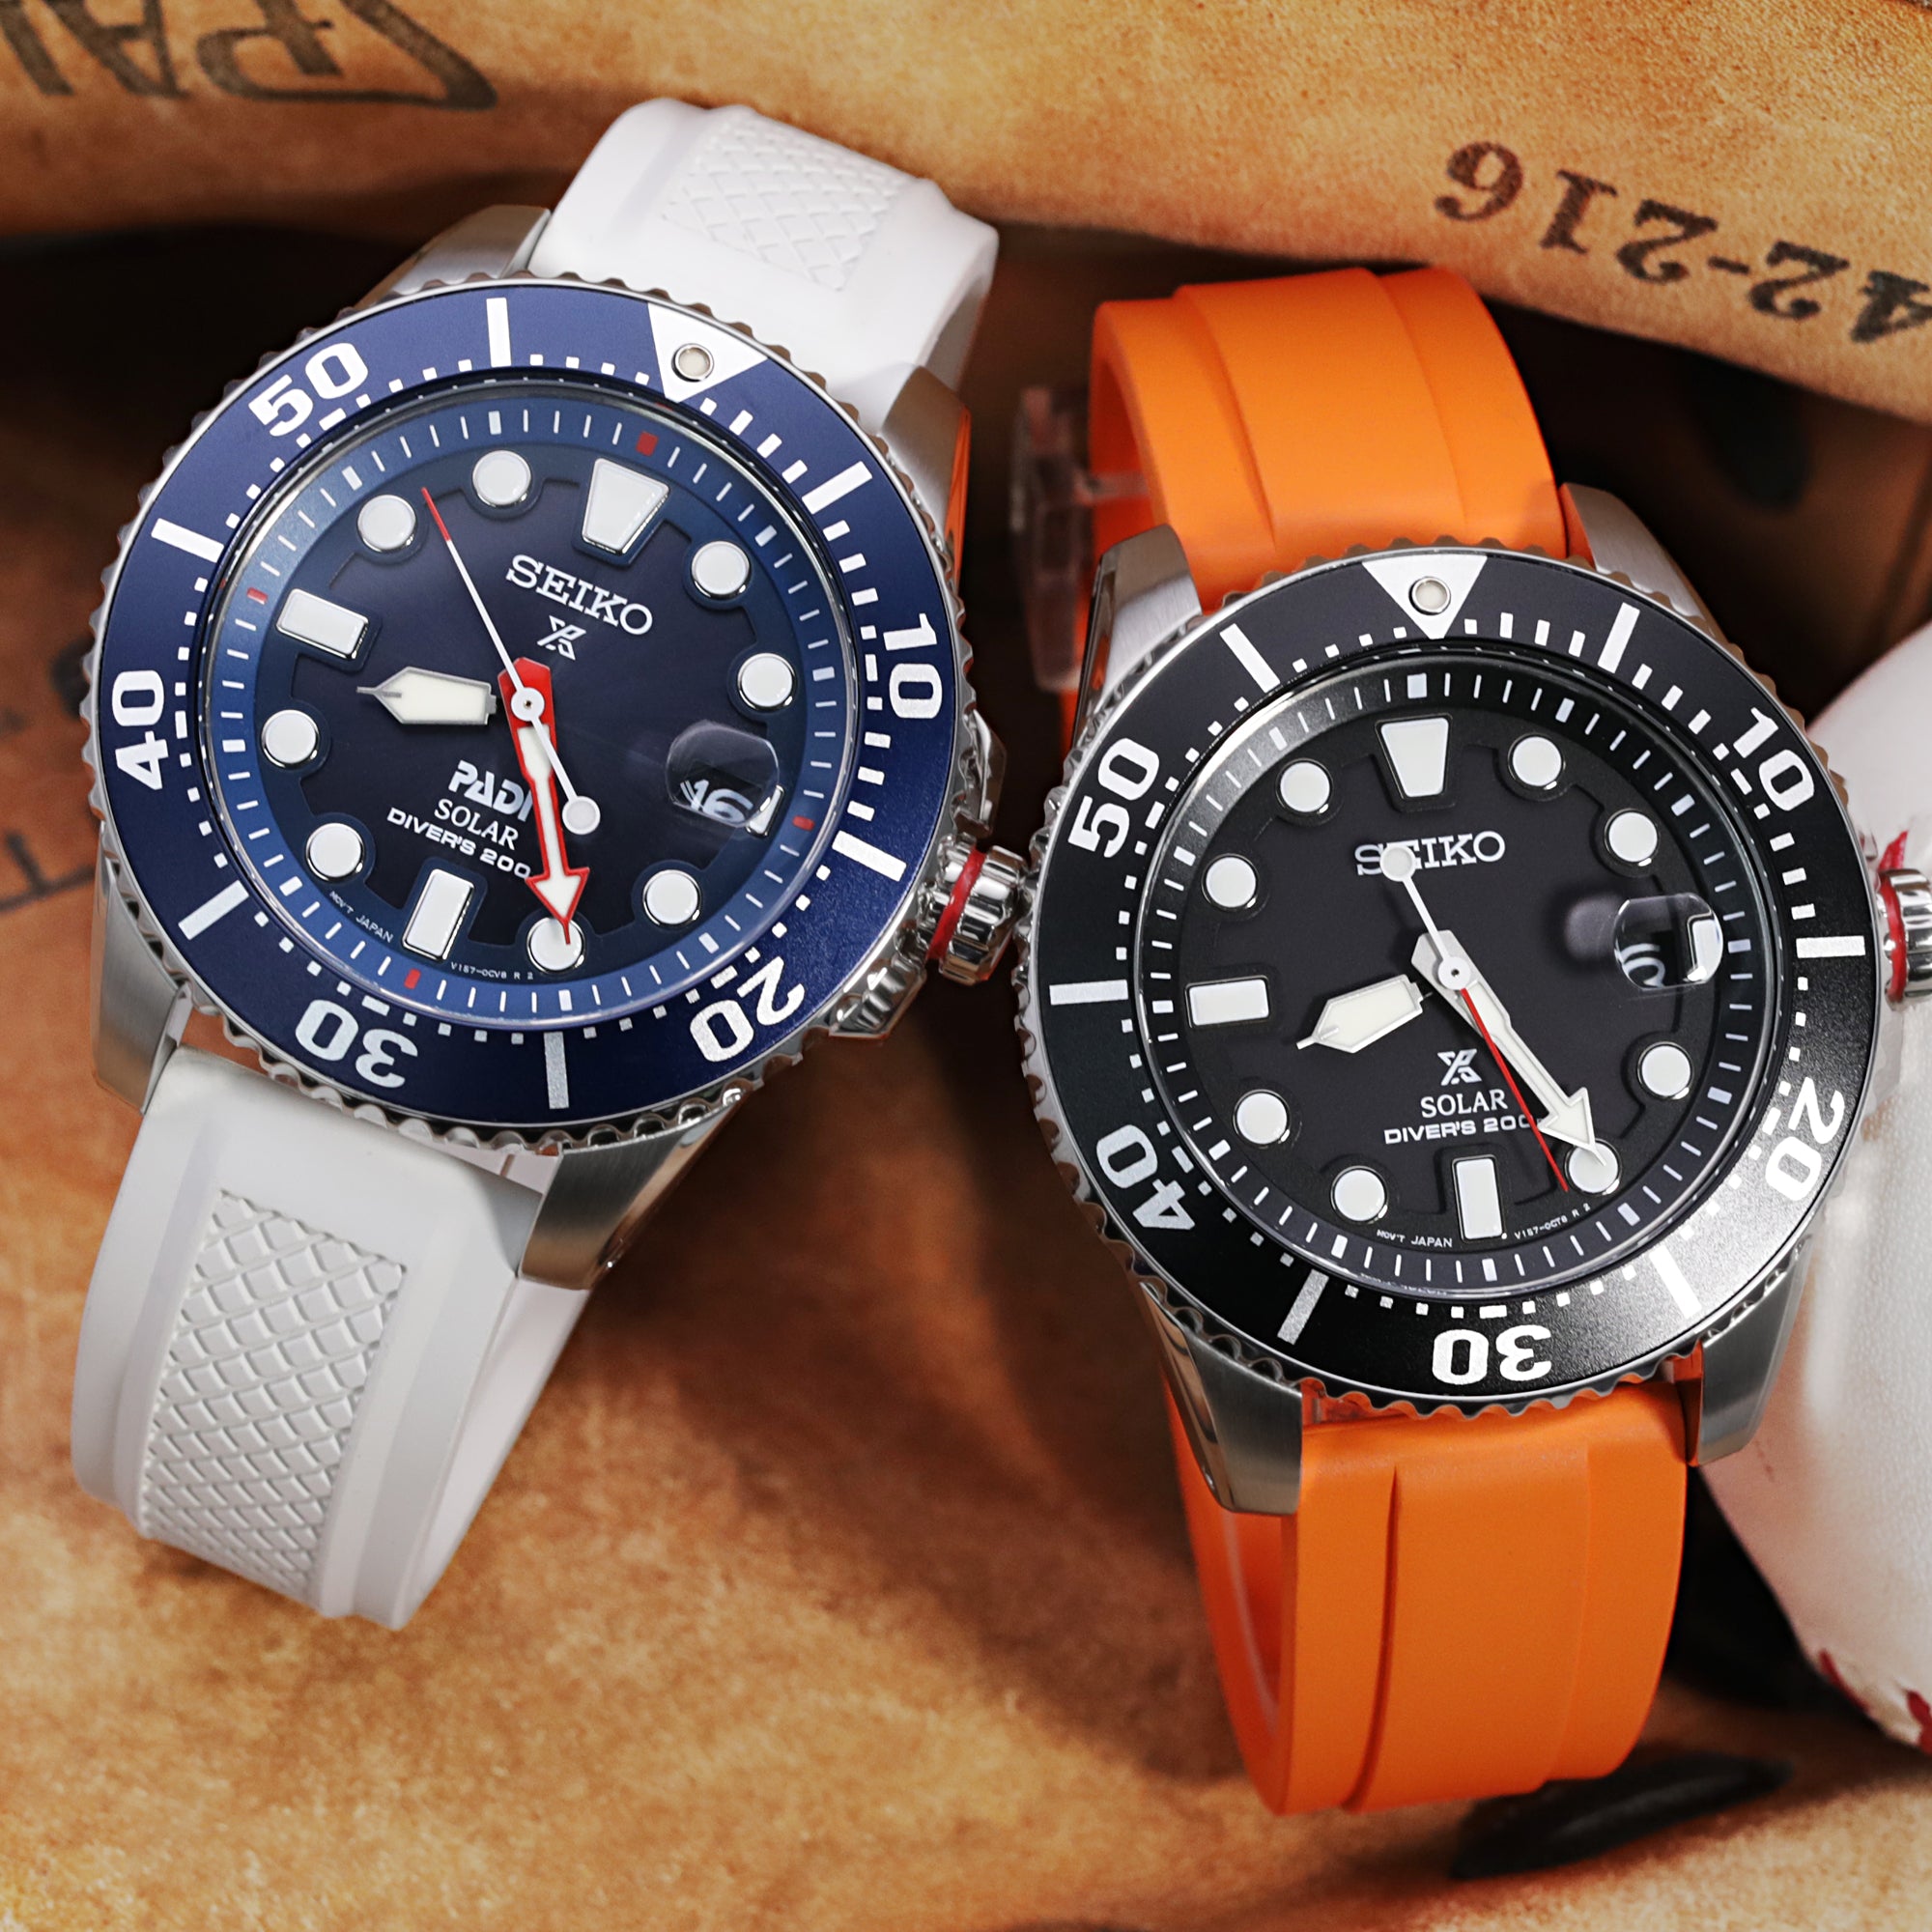 flicker lindre Hula hop Two Brilliant New Additions to Seiko Solar Watch Family | Strapcode